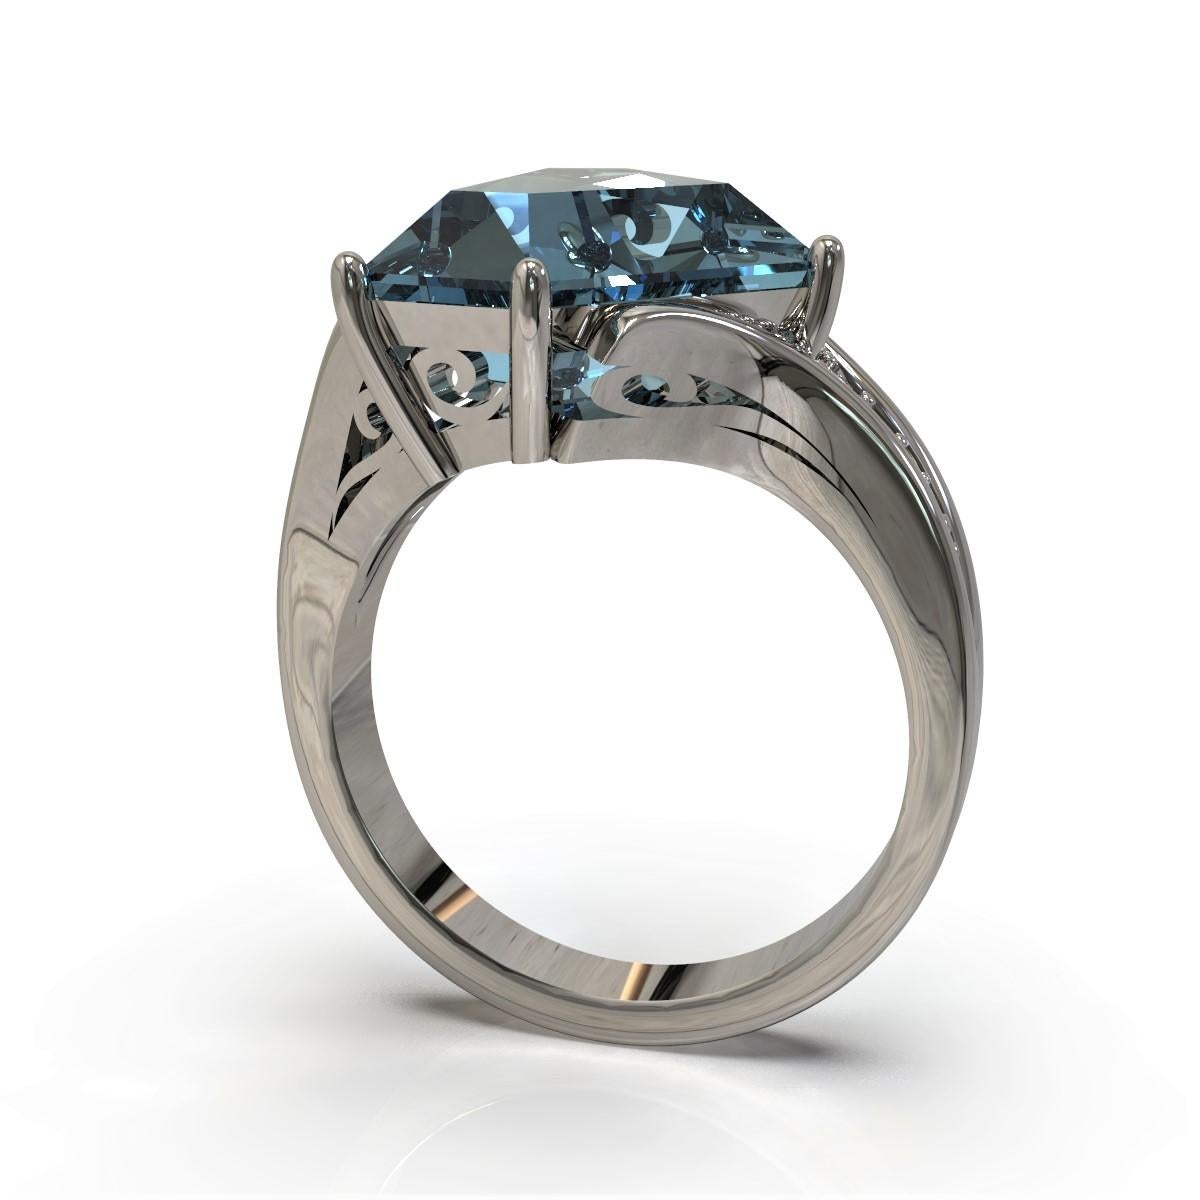 Kian Design 5.93 Carat Aquamarine and Diamond Cocktail Ring in Platinum In New Condition For Sale In South Perth, AU